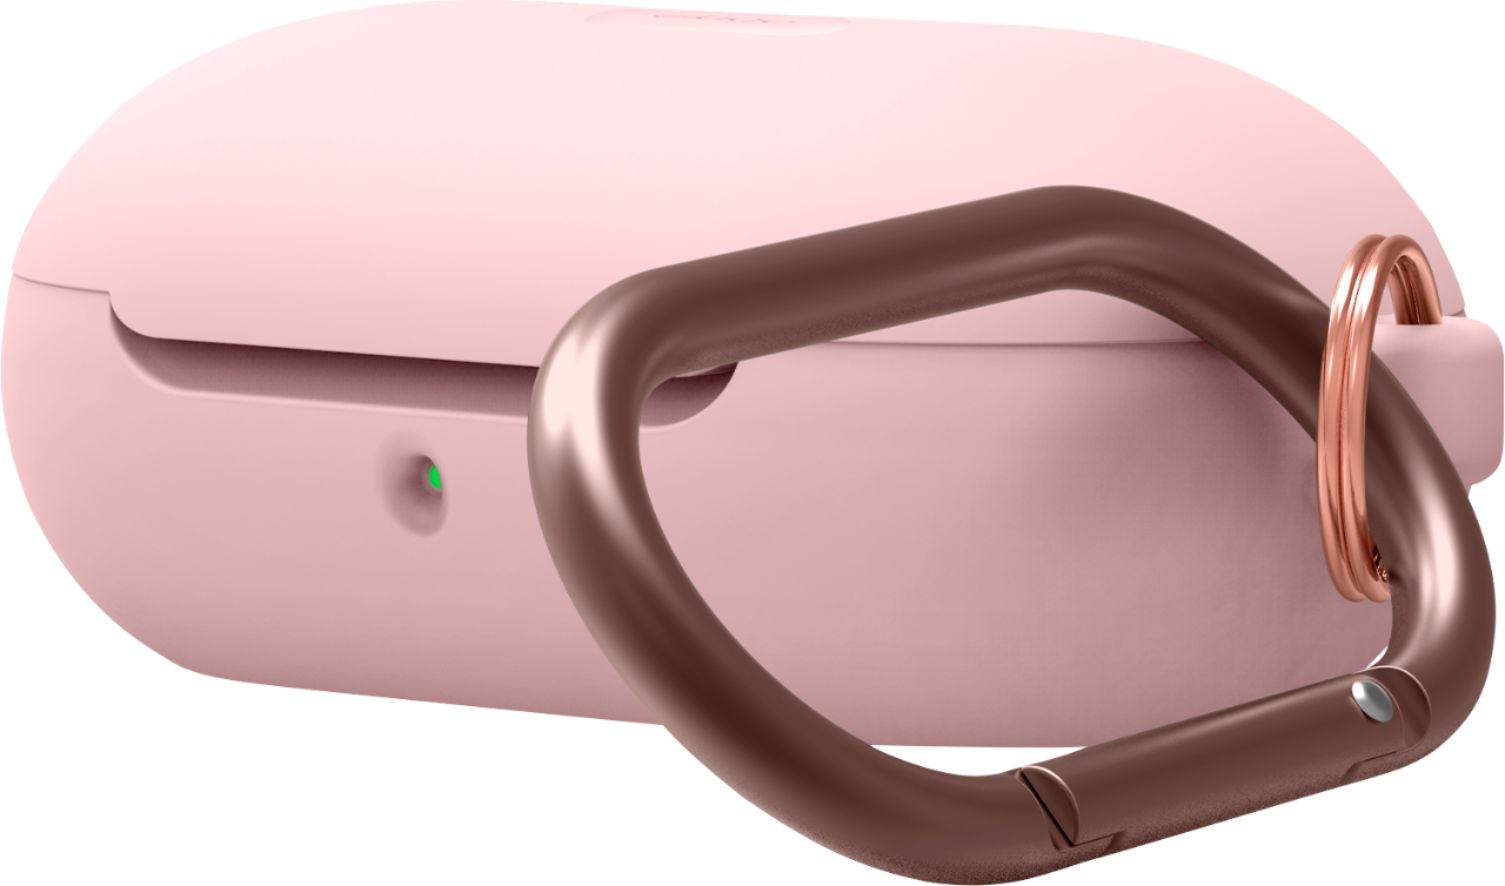 Angle View: Elago - Hang Case for Samsung Galaxy Buds - Lovely Pink